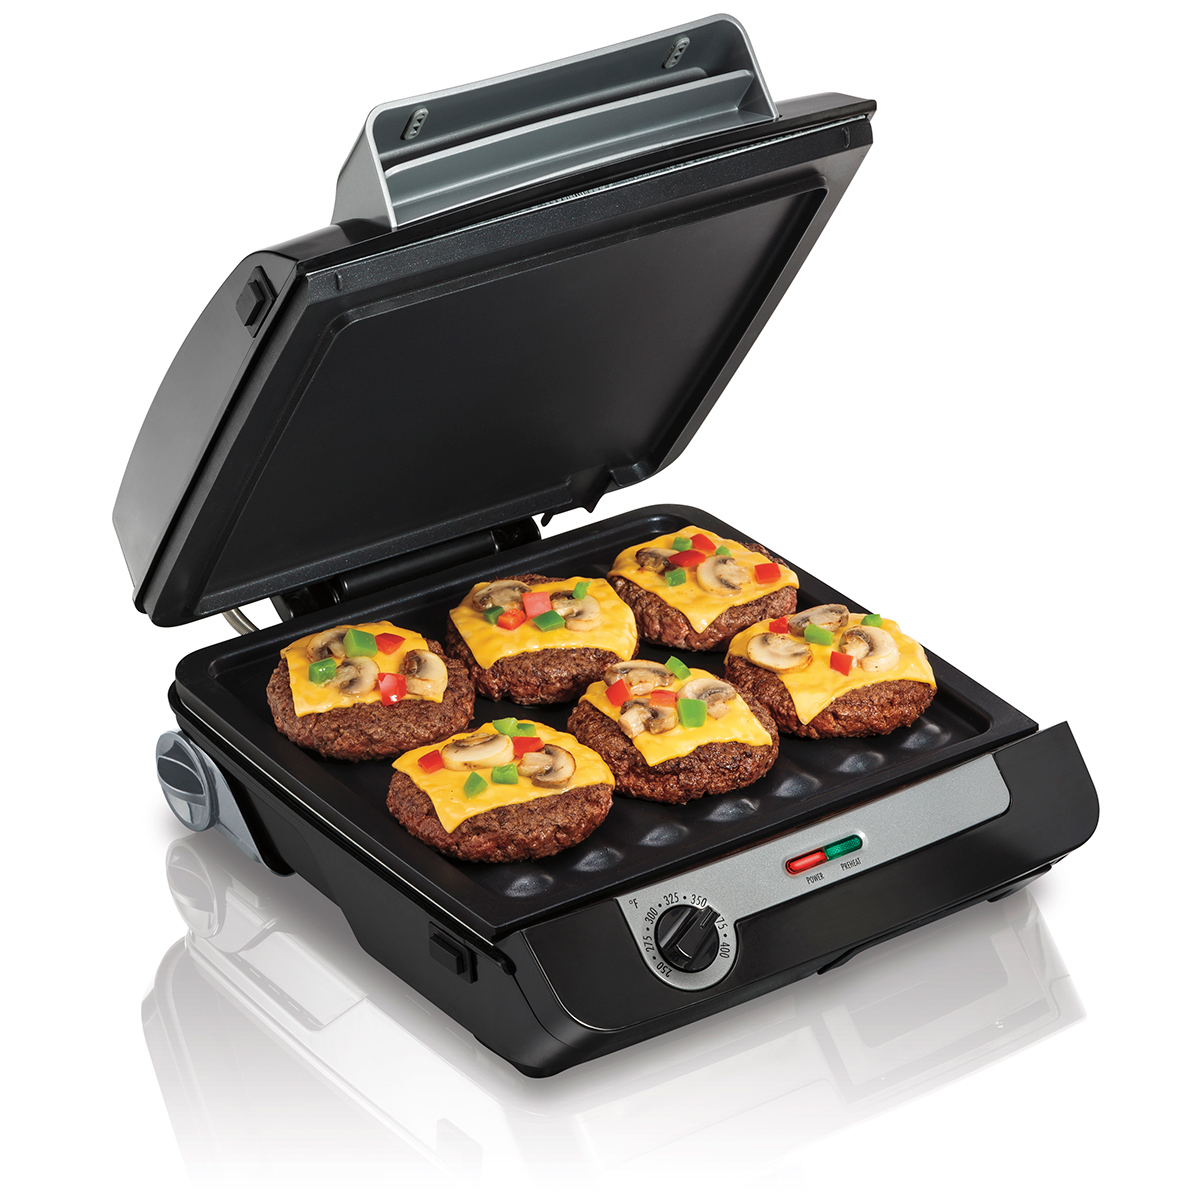 https://www.momjunction.com/wp-content/uploads/product-images/hamilton-beach-4-in-1-indoor-grill--electric-griddle-combo-with-bacon-cooker_afl330.jpg